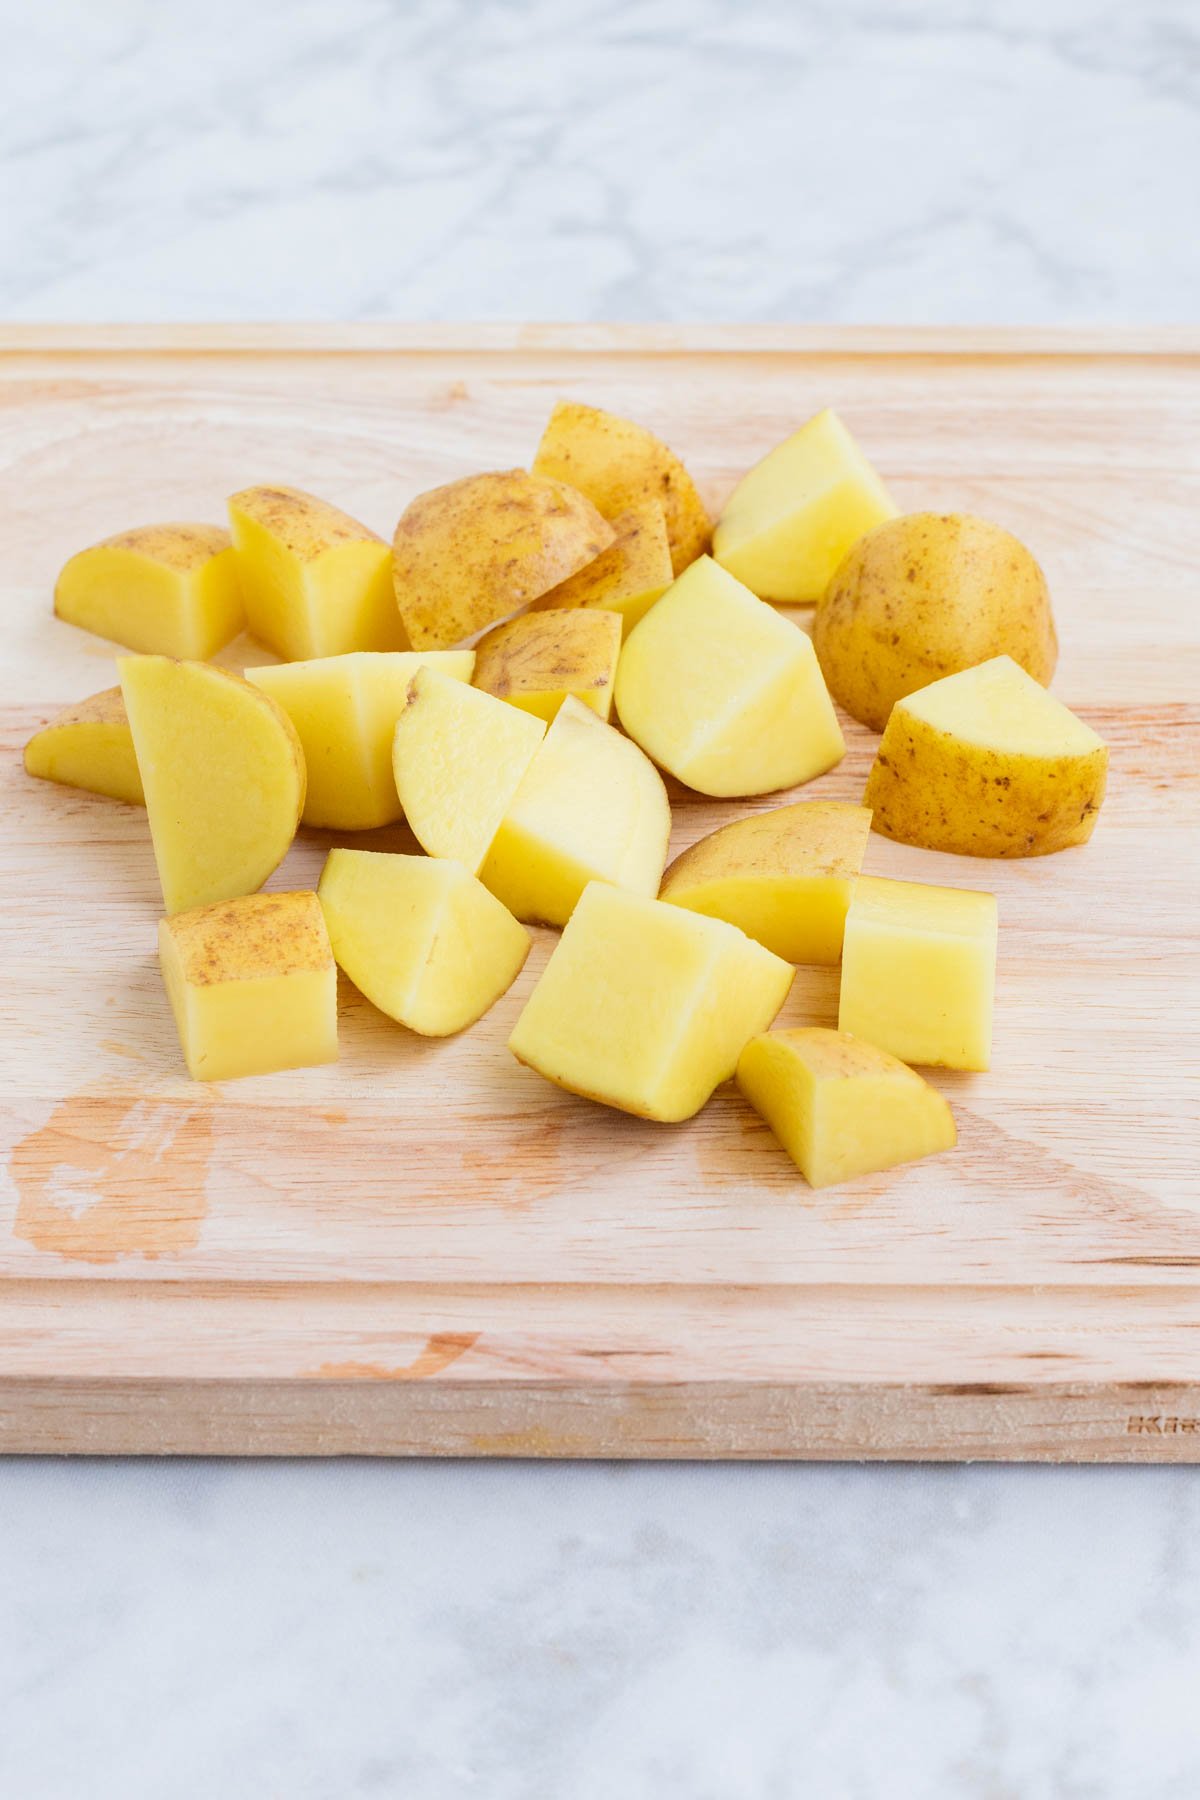 Potatoes are cubed on a cutting board.